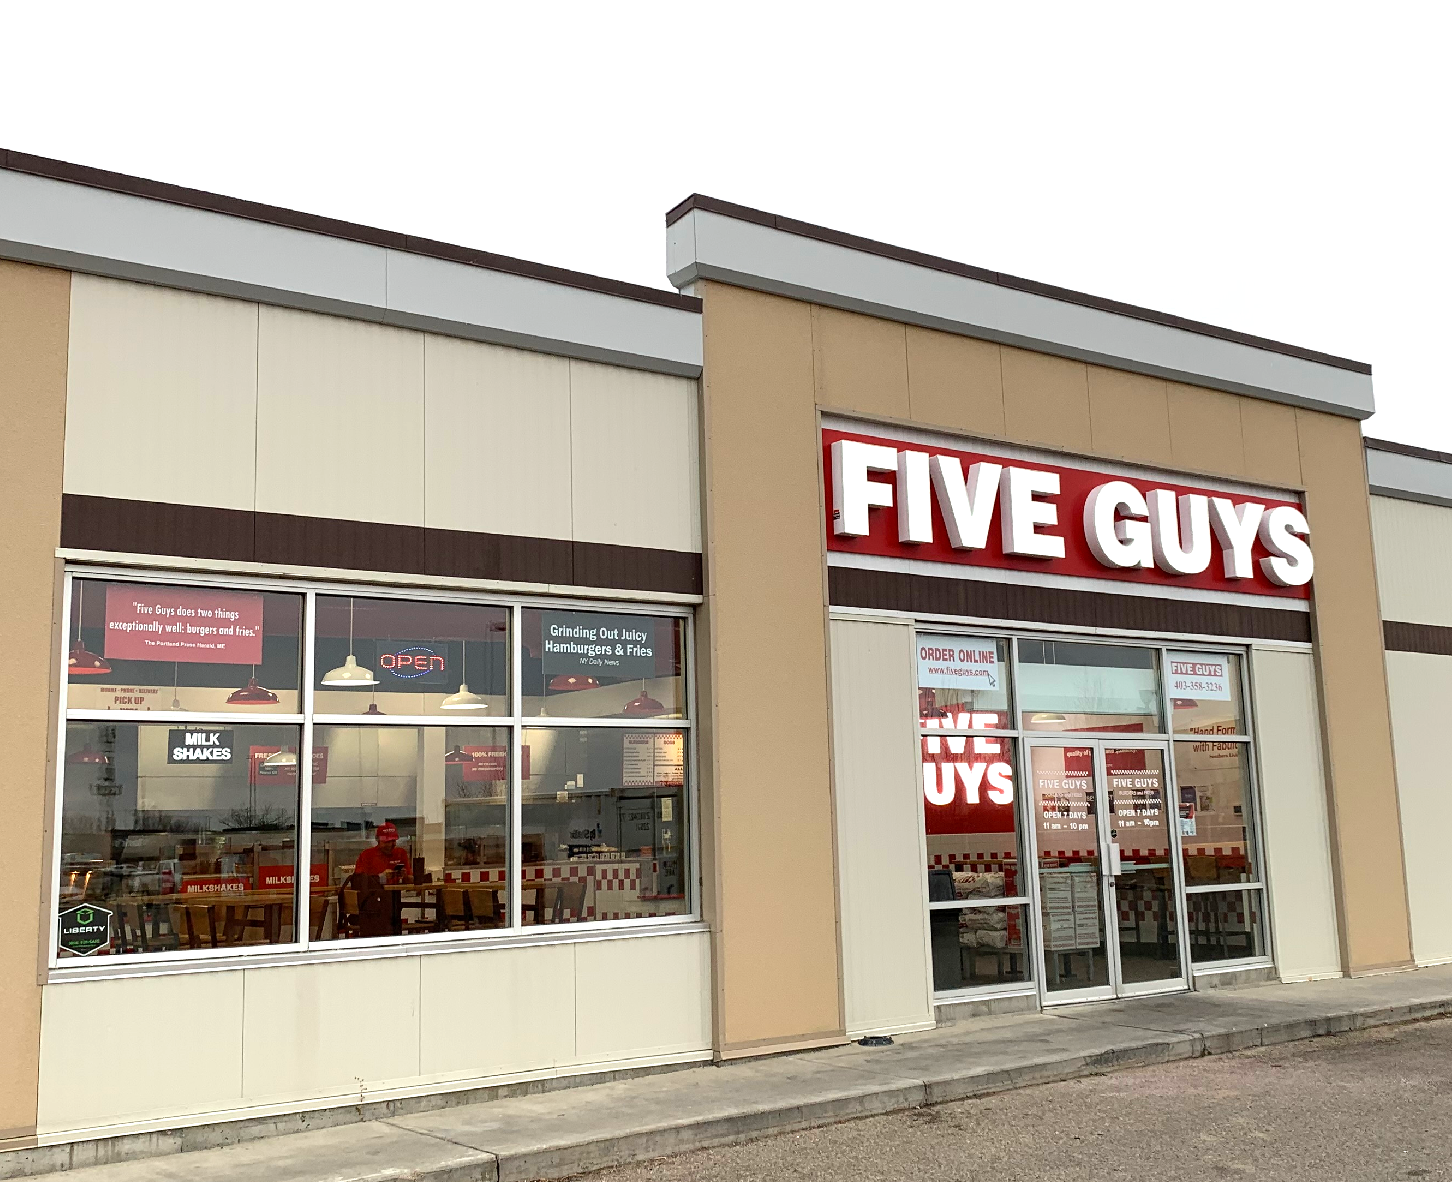 Entrance to the Five Guys restaurant at 2030 50th Avenue in Red Deer, Alberta, Canada. Five Guys Red Deer (403)358-3236